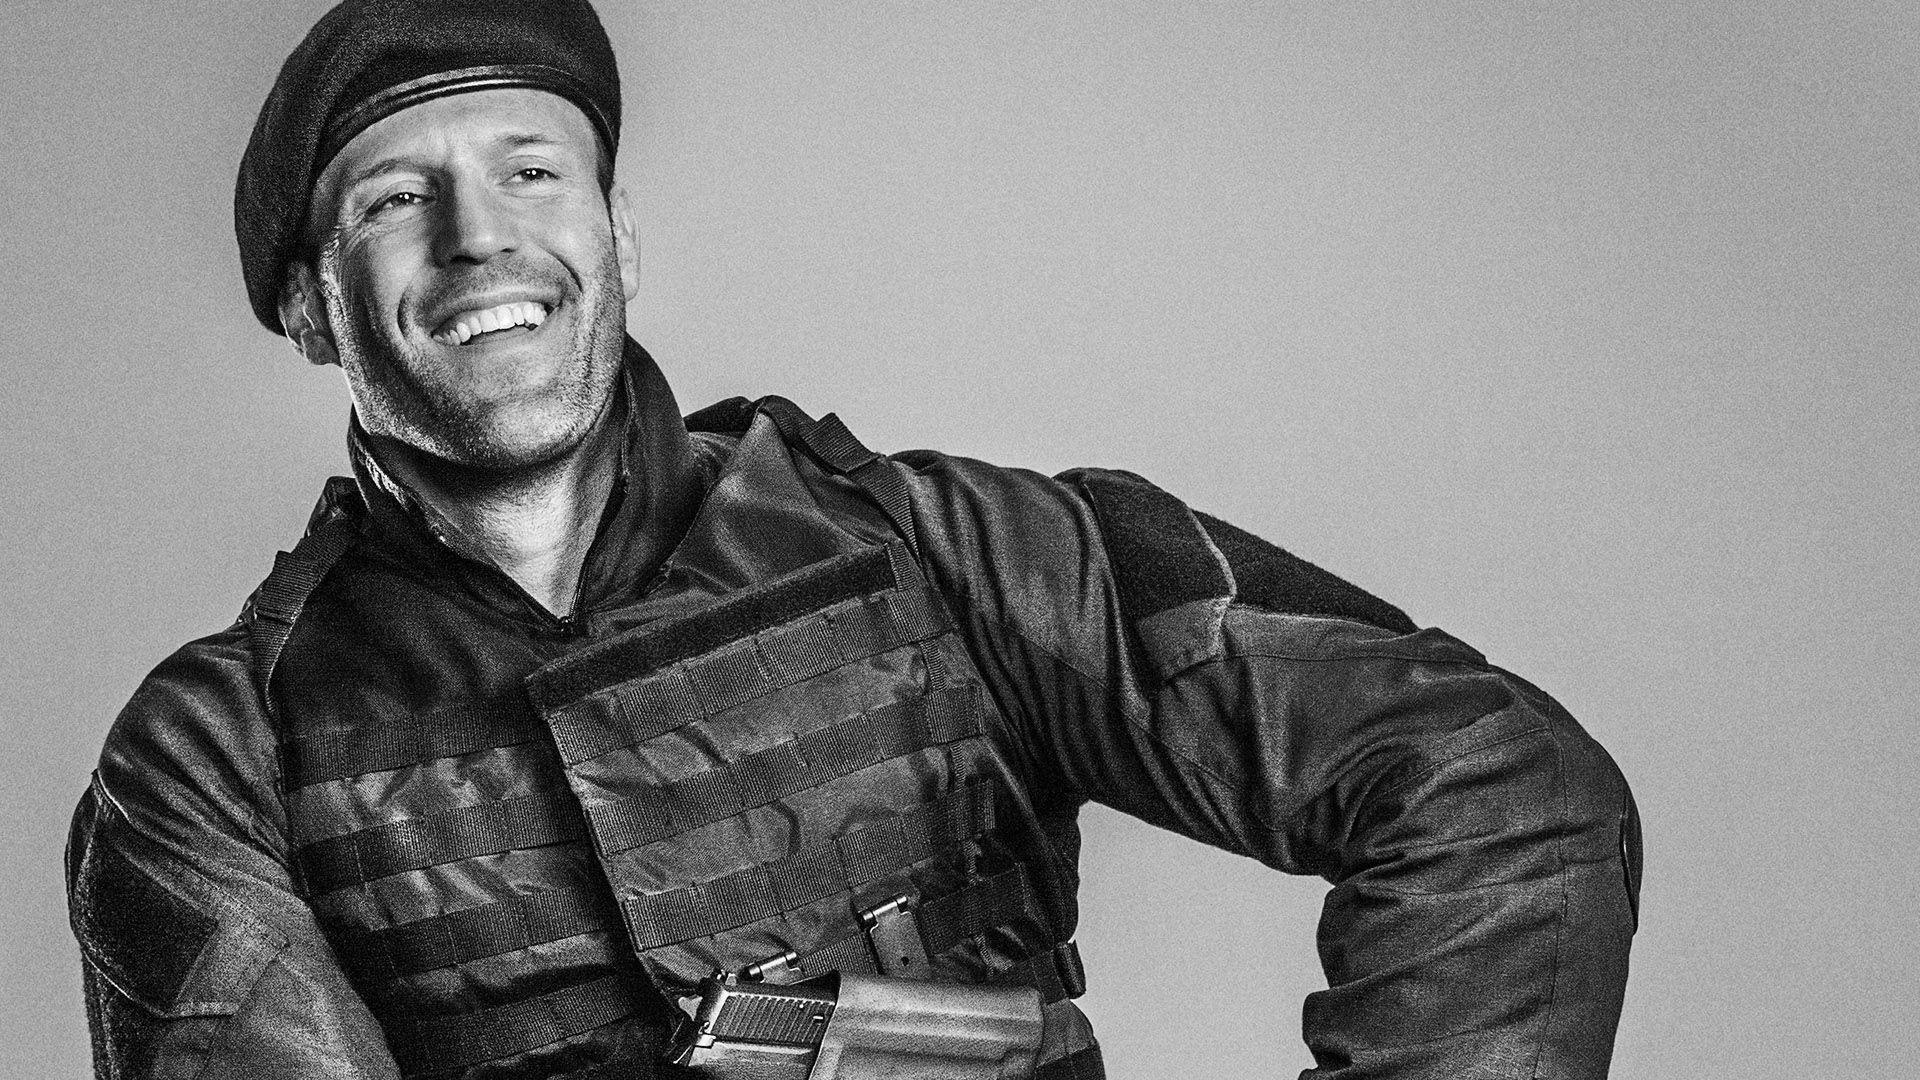 Jason Statham In The Expendables 3 Movie Wallpaper Wide or HD